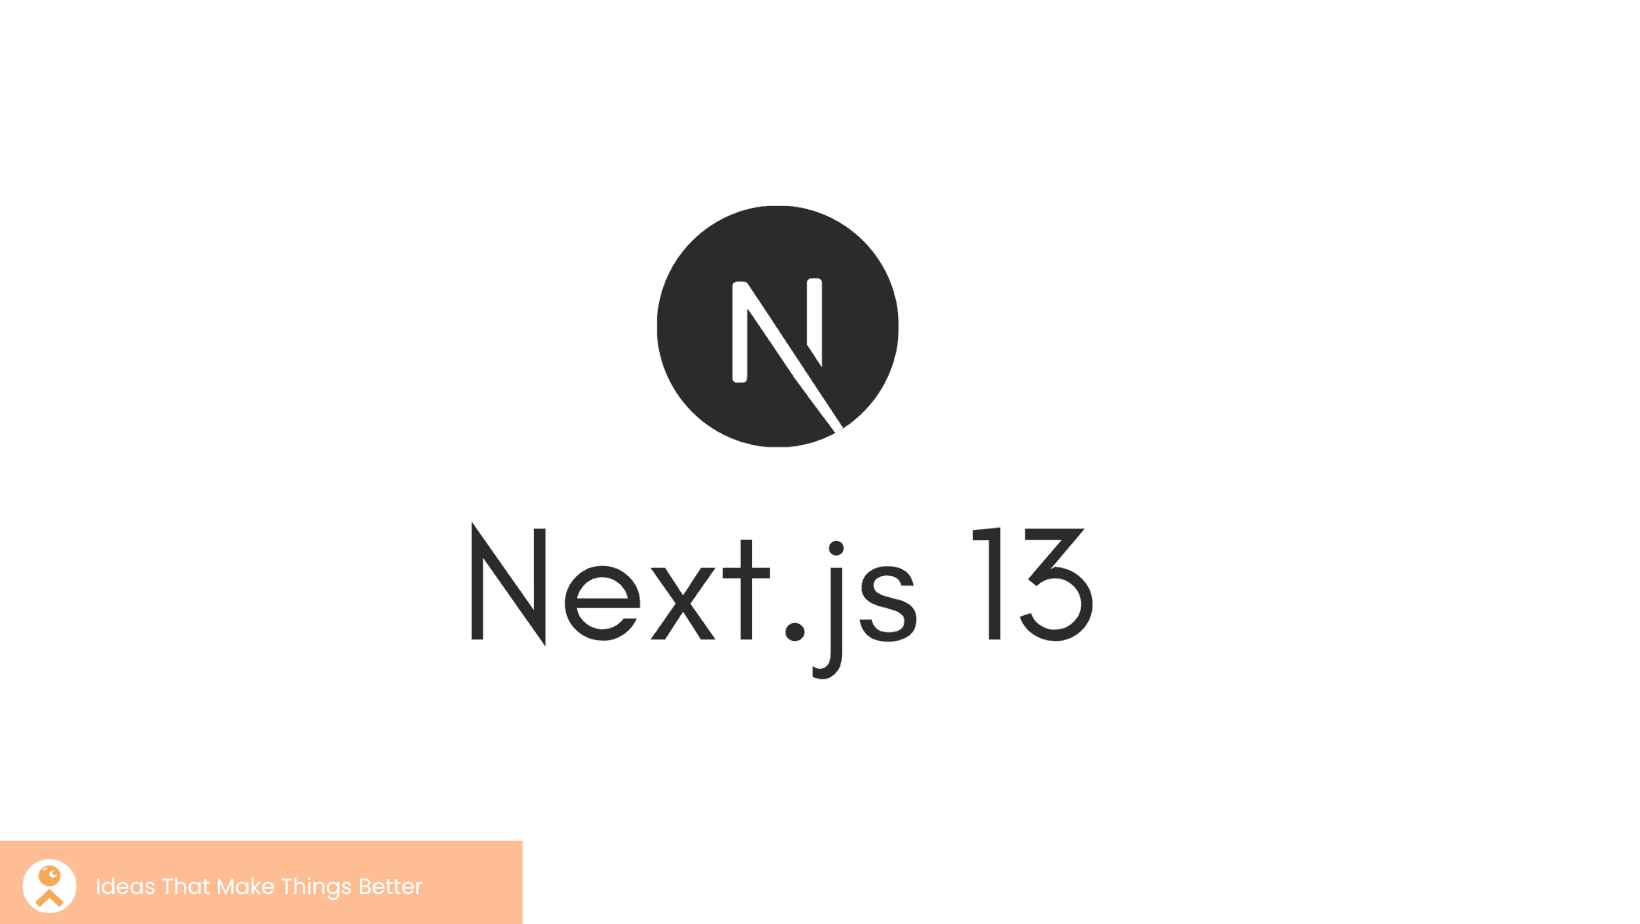 Next.js 13 is here